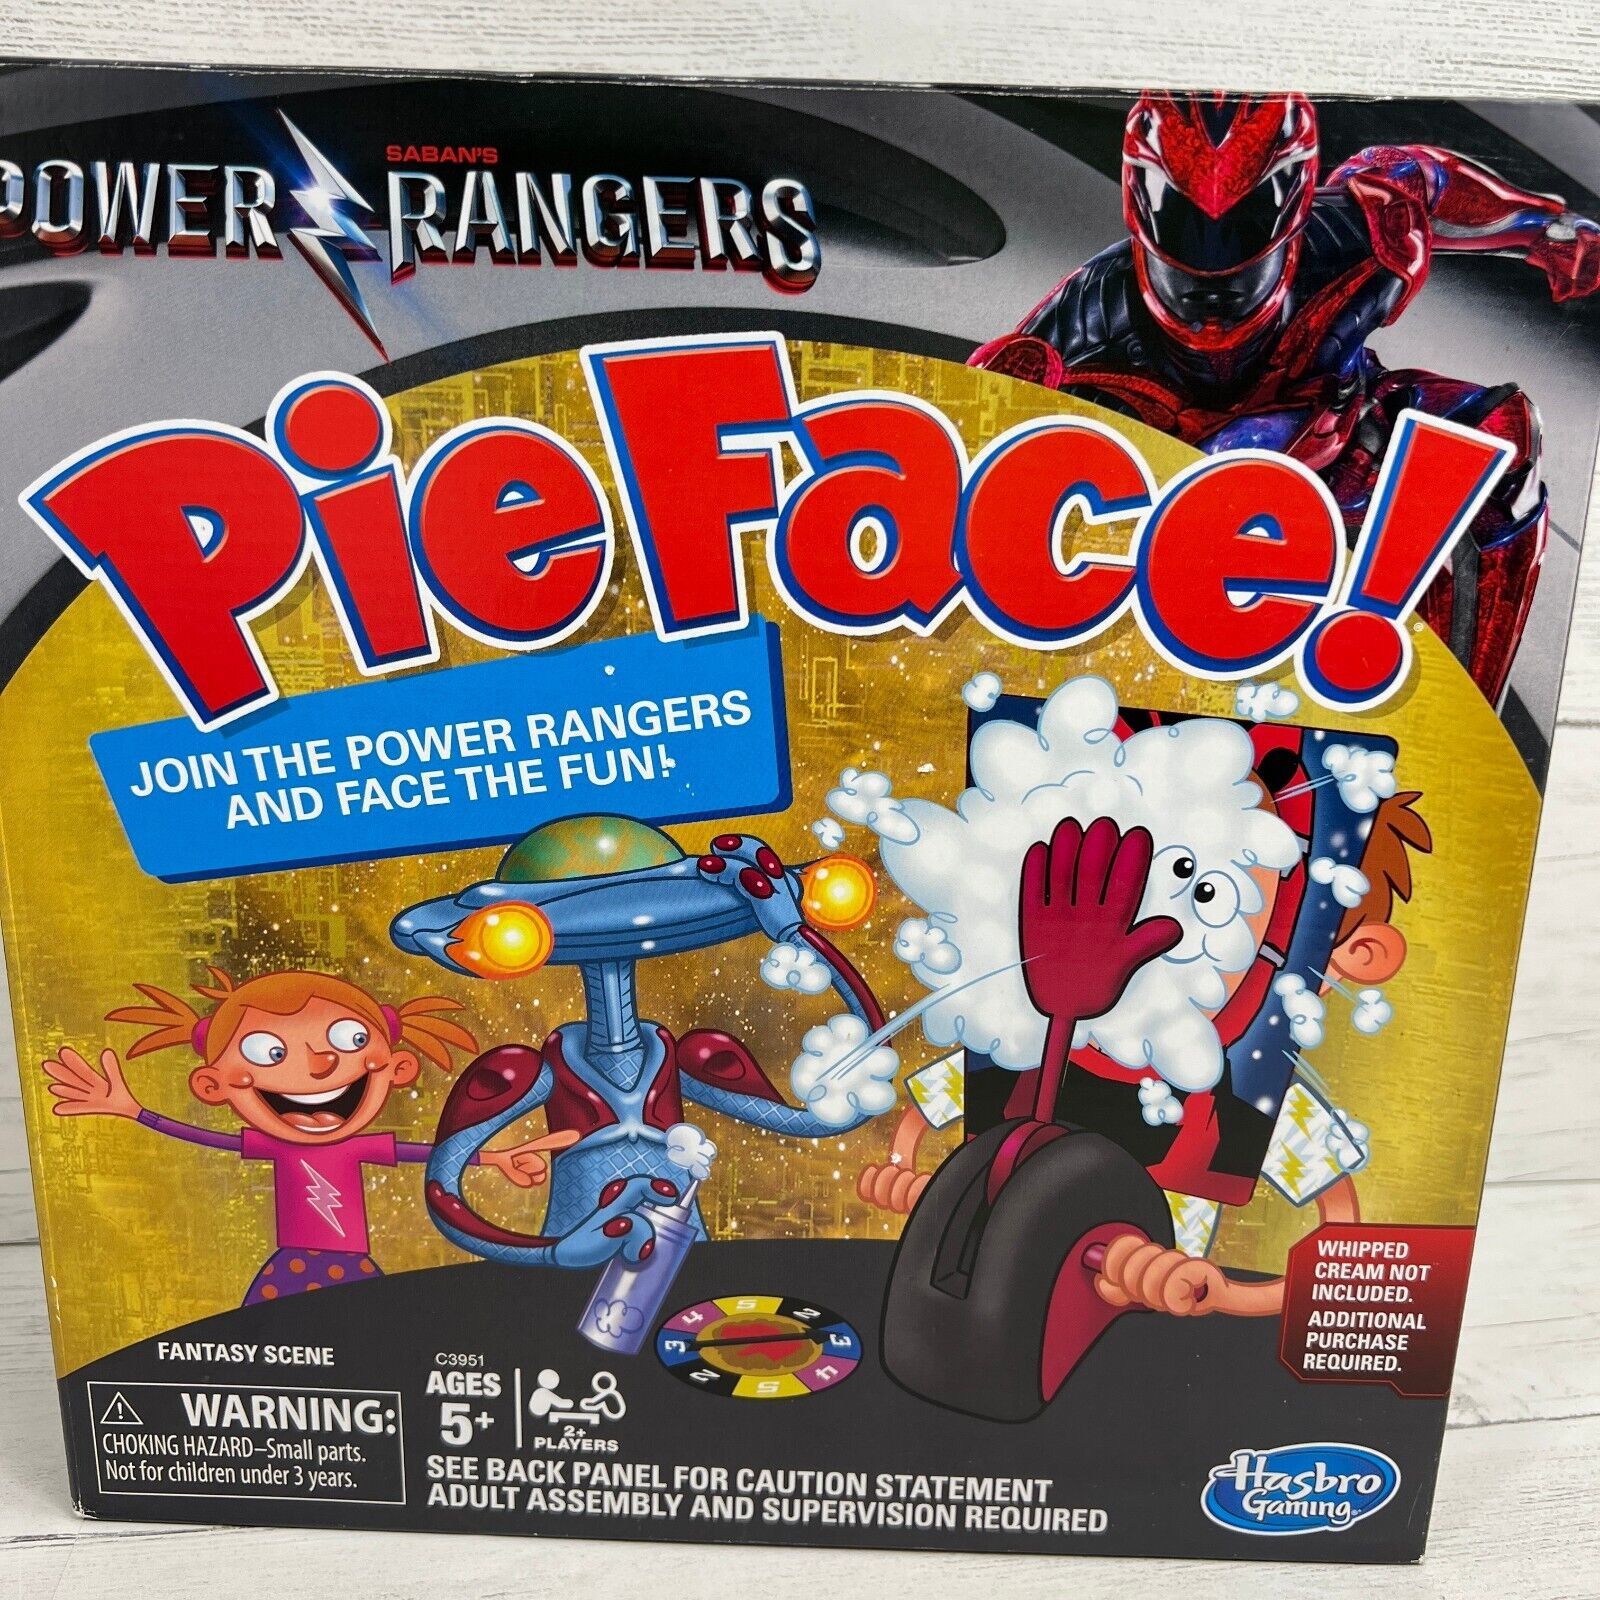 Hasbro Games Pie Face 2017 Power Rangers Whipped Cream Spin Handle Turn Crank - $39.99